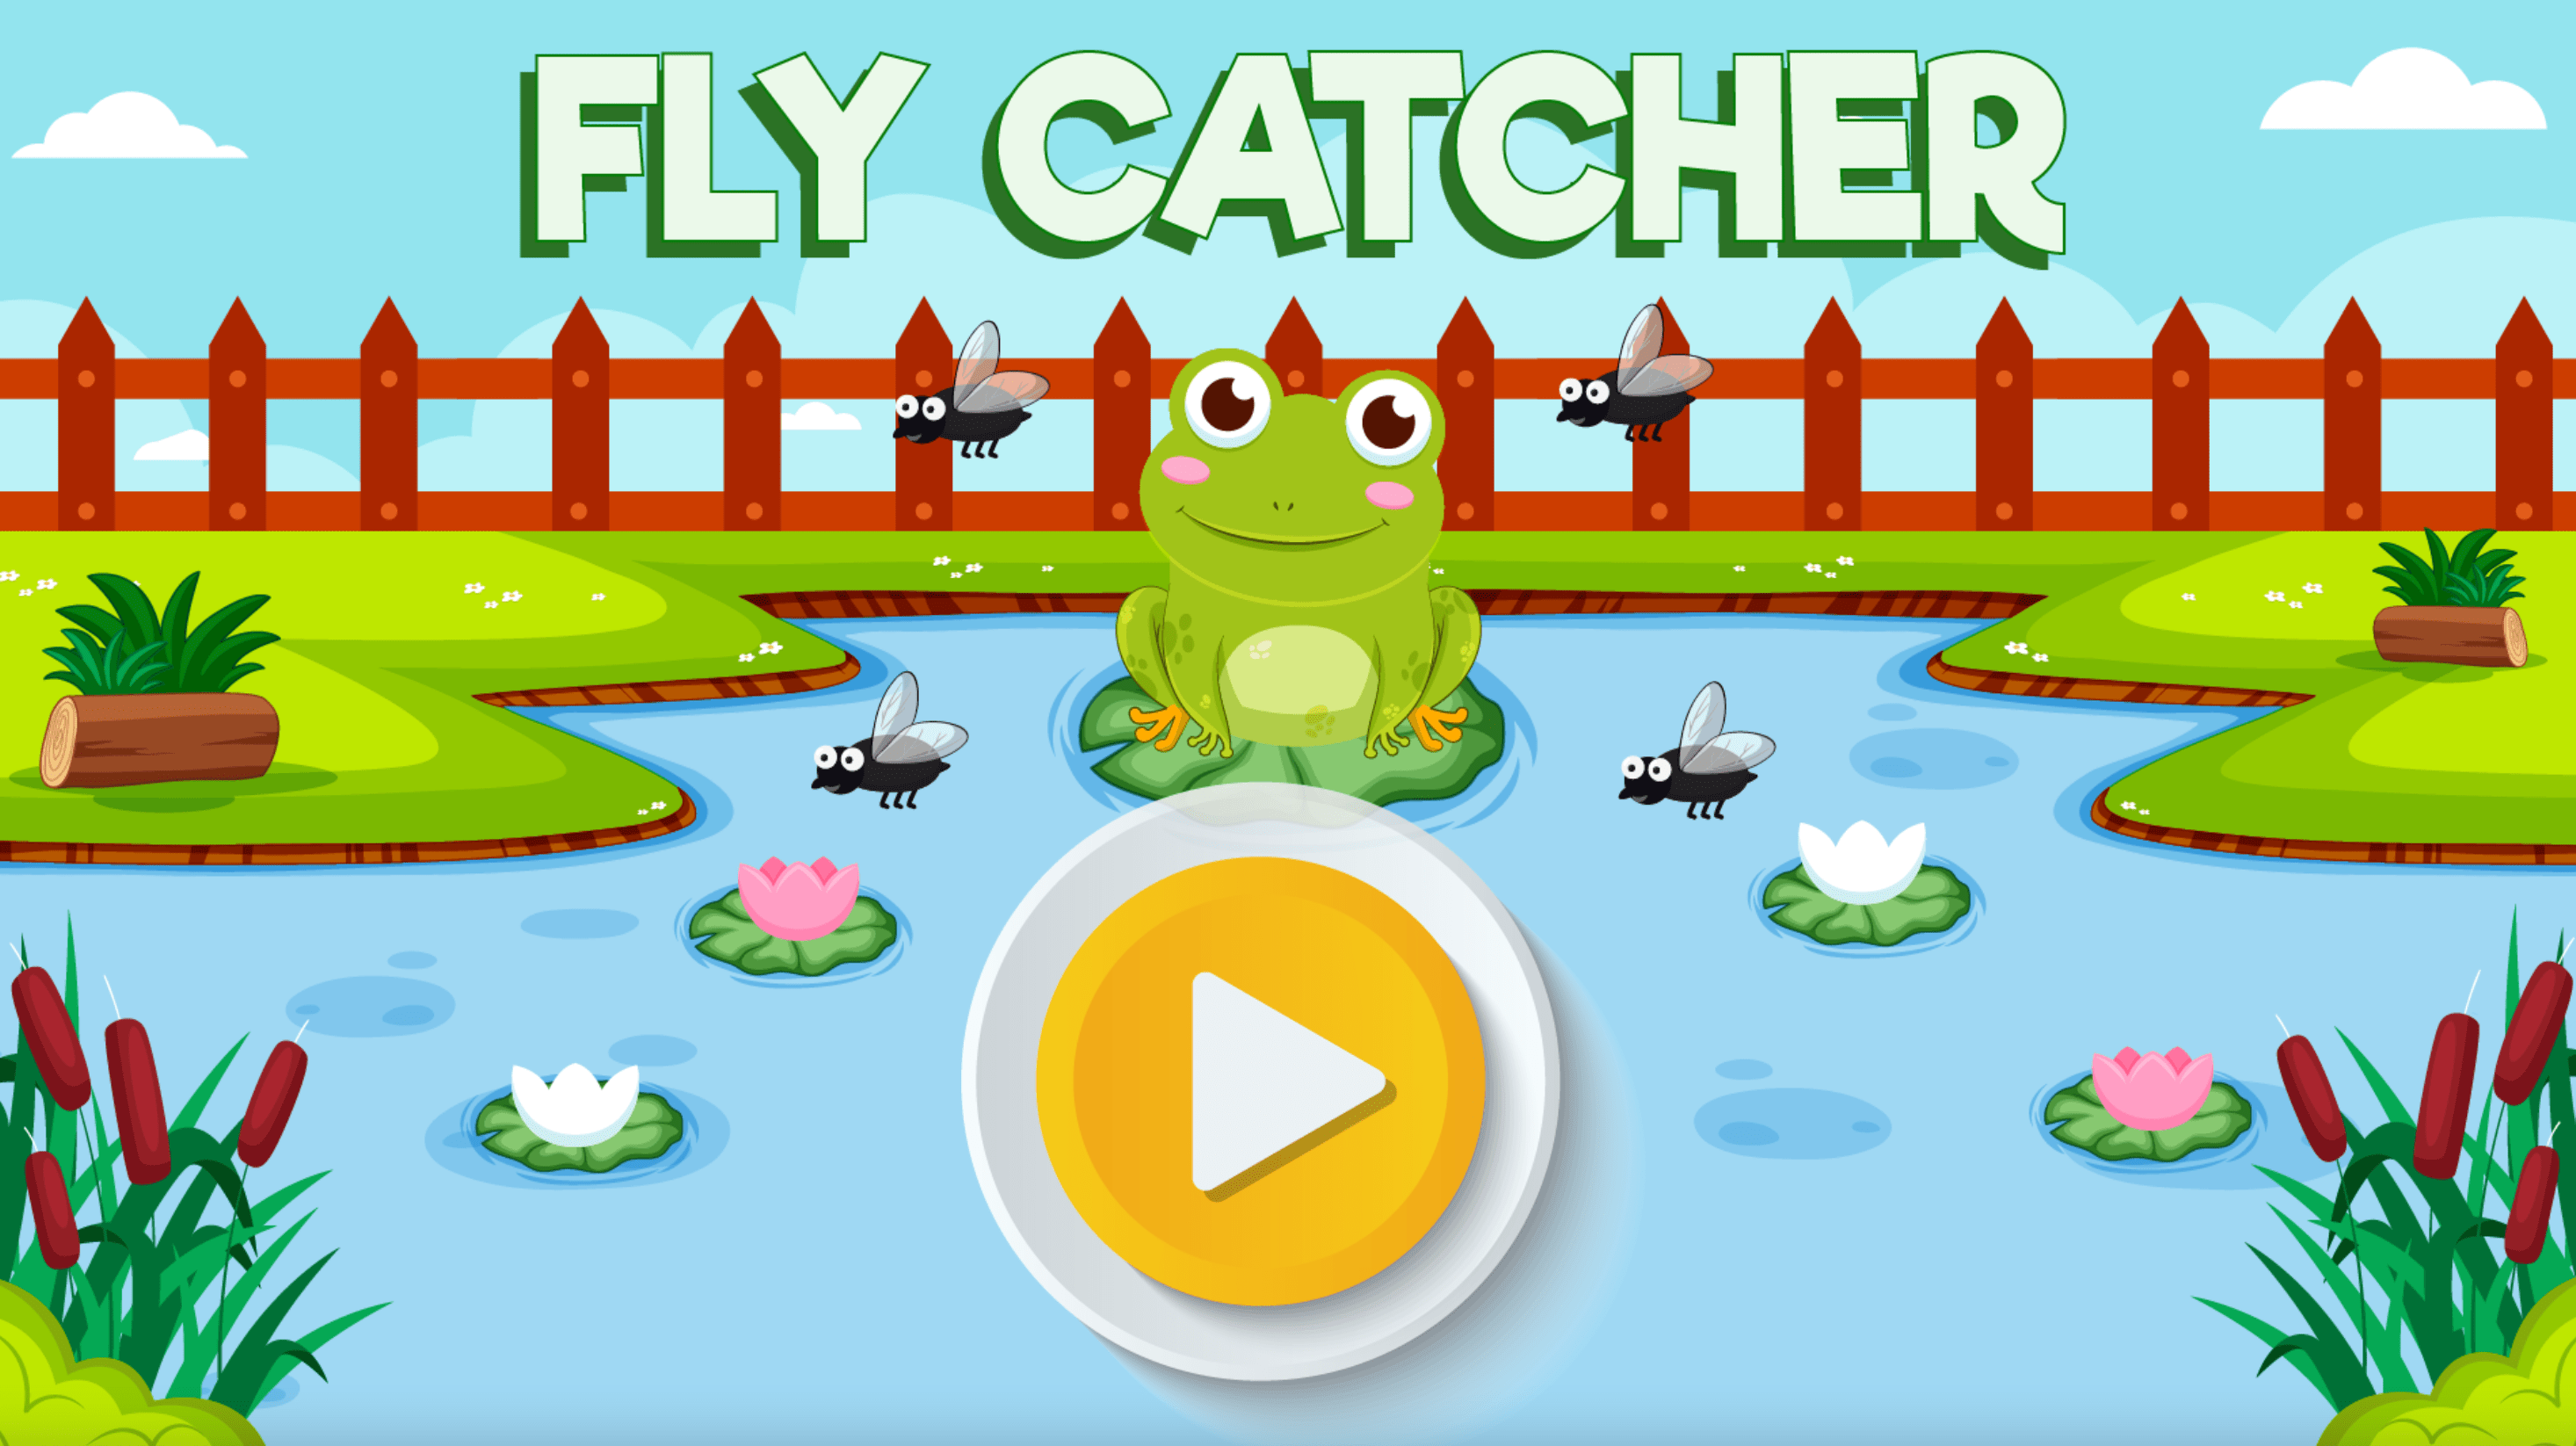 Game title screen featuring a frog on a lily pad and a yellow play button.